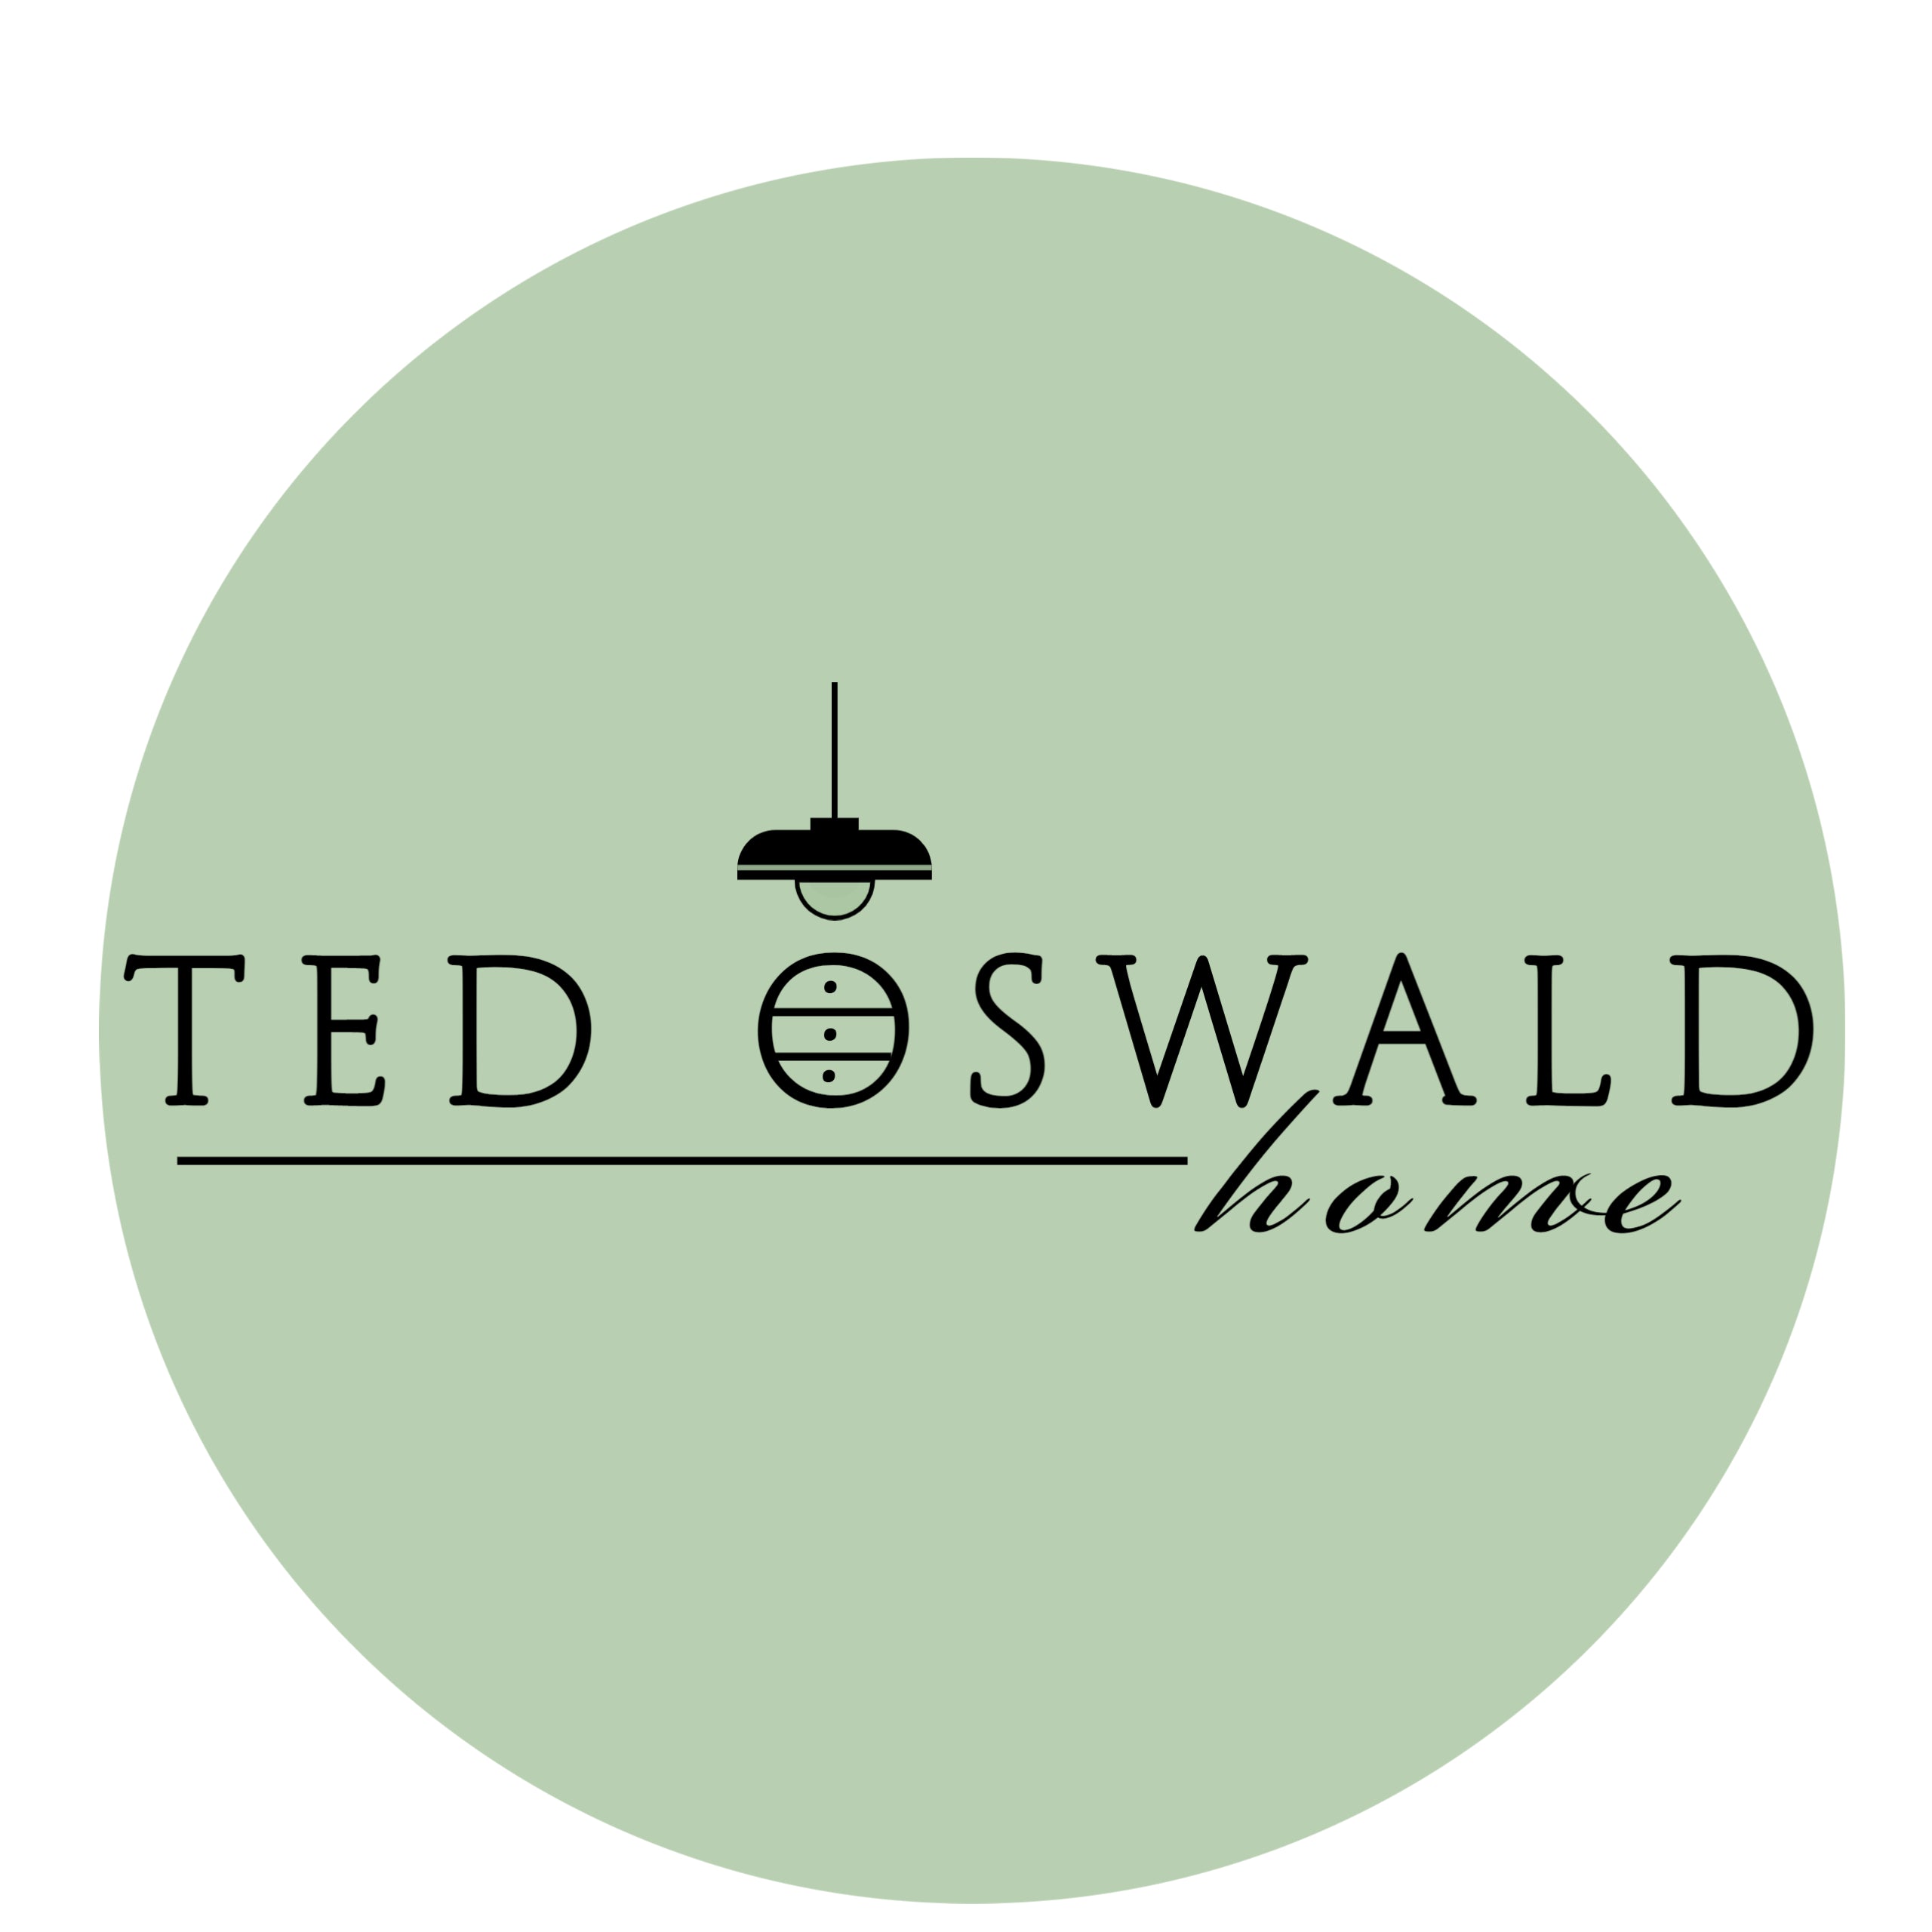 Ted Oswald